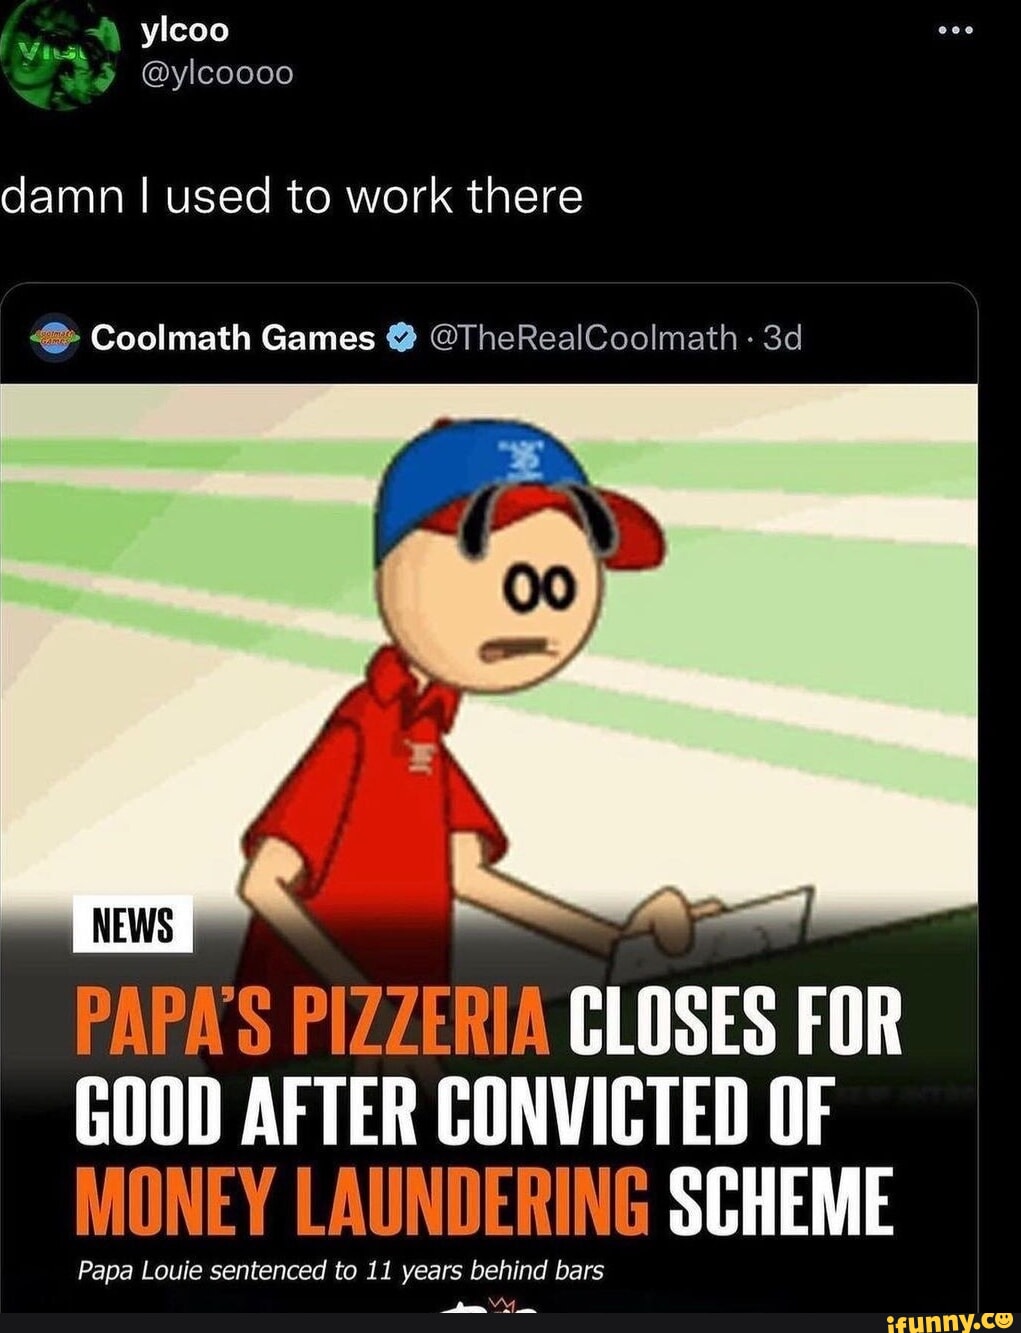 Ylcoo 5 @ylcoooo damn I used to work there Coolmath Games @  @TheRealCoolmath - I PAPA'S PIZZERIA CLOSES